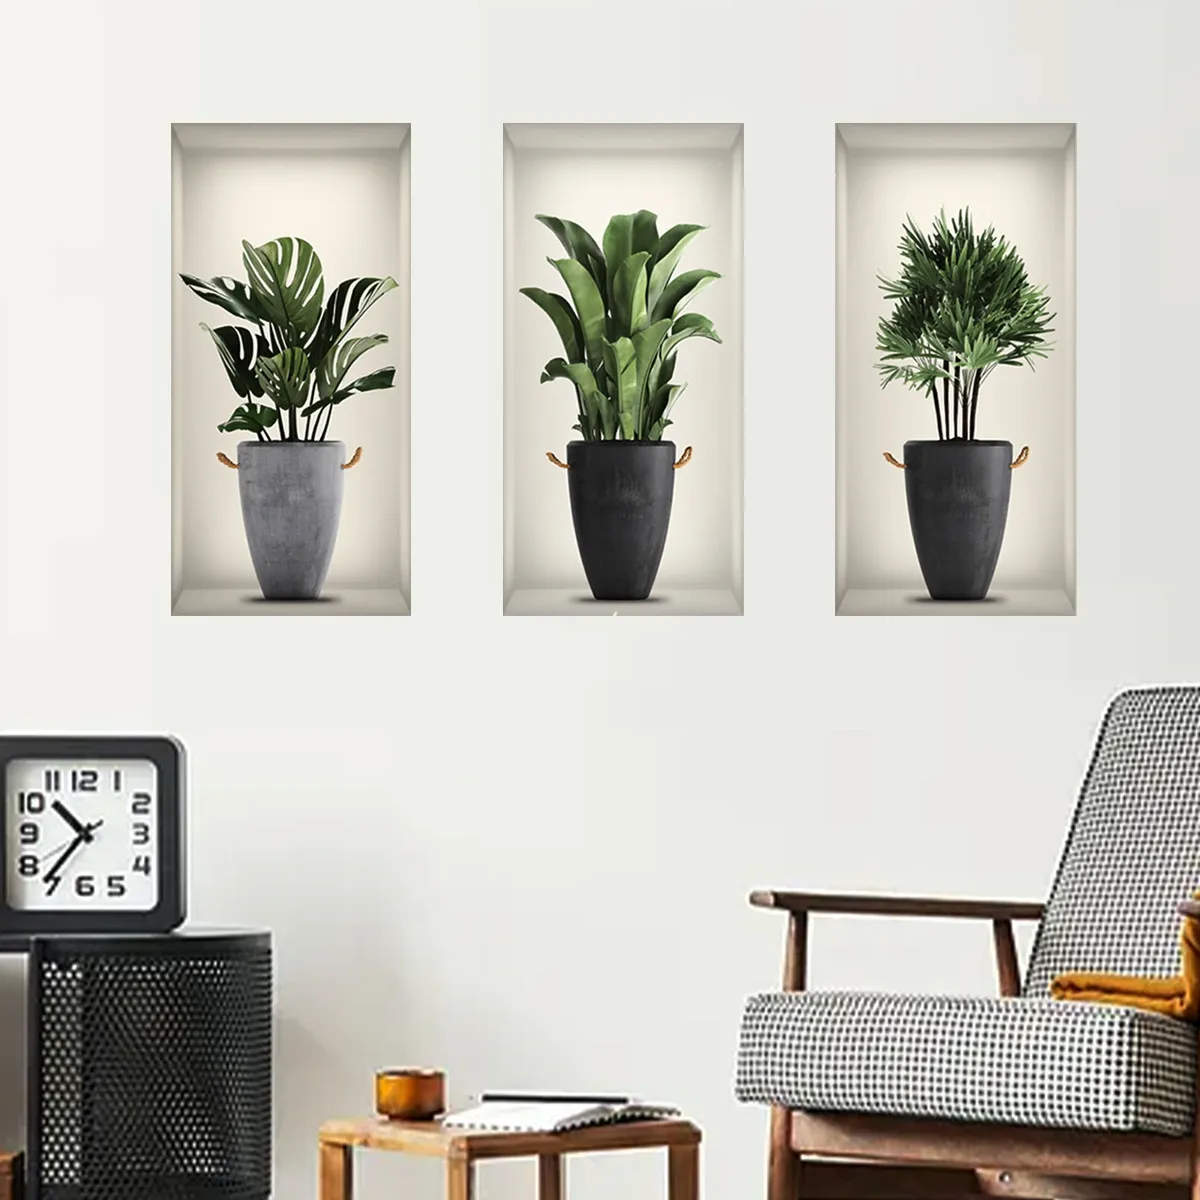 2023 Ny kreativ simulering Grön Plant Potted 3D Wall Stickers Living Room Study Office Waterproof Decorative Stickers